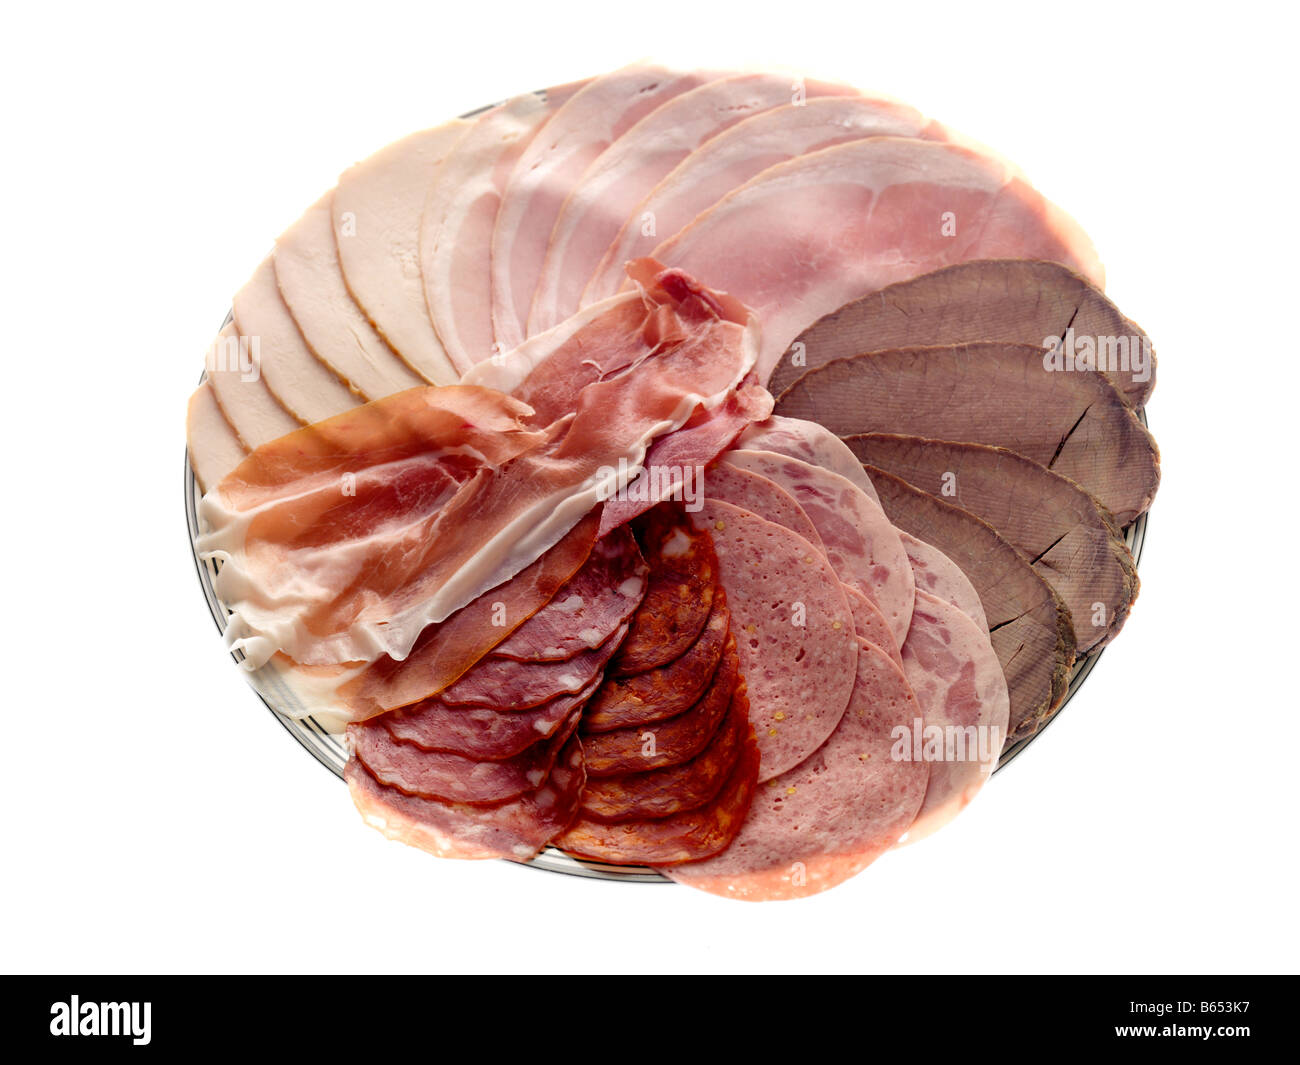 Cooked Meat Platter Stock Photo